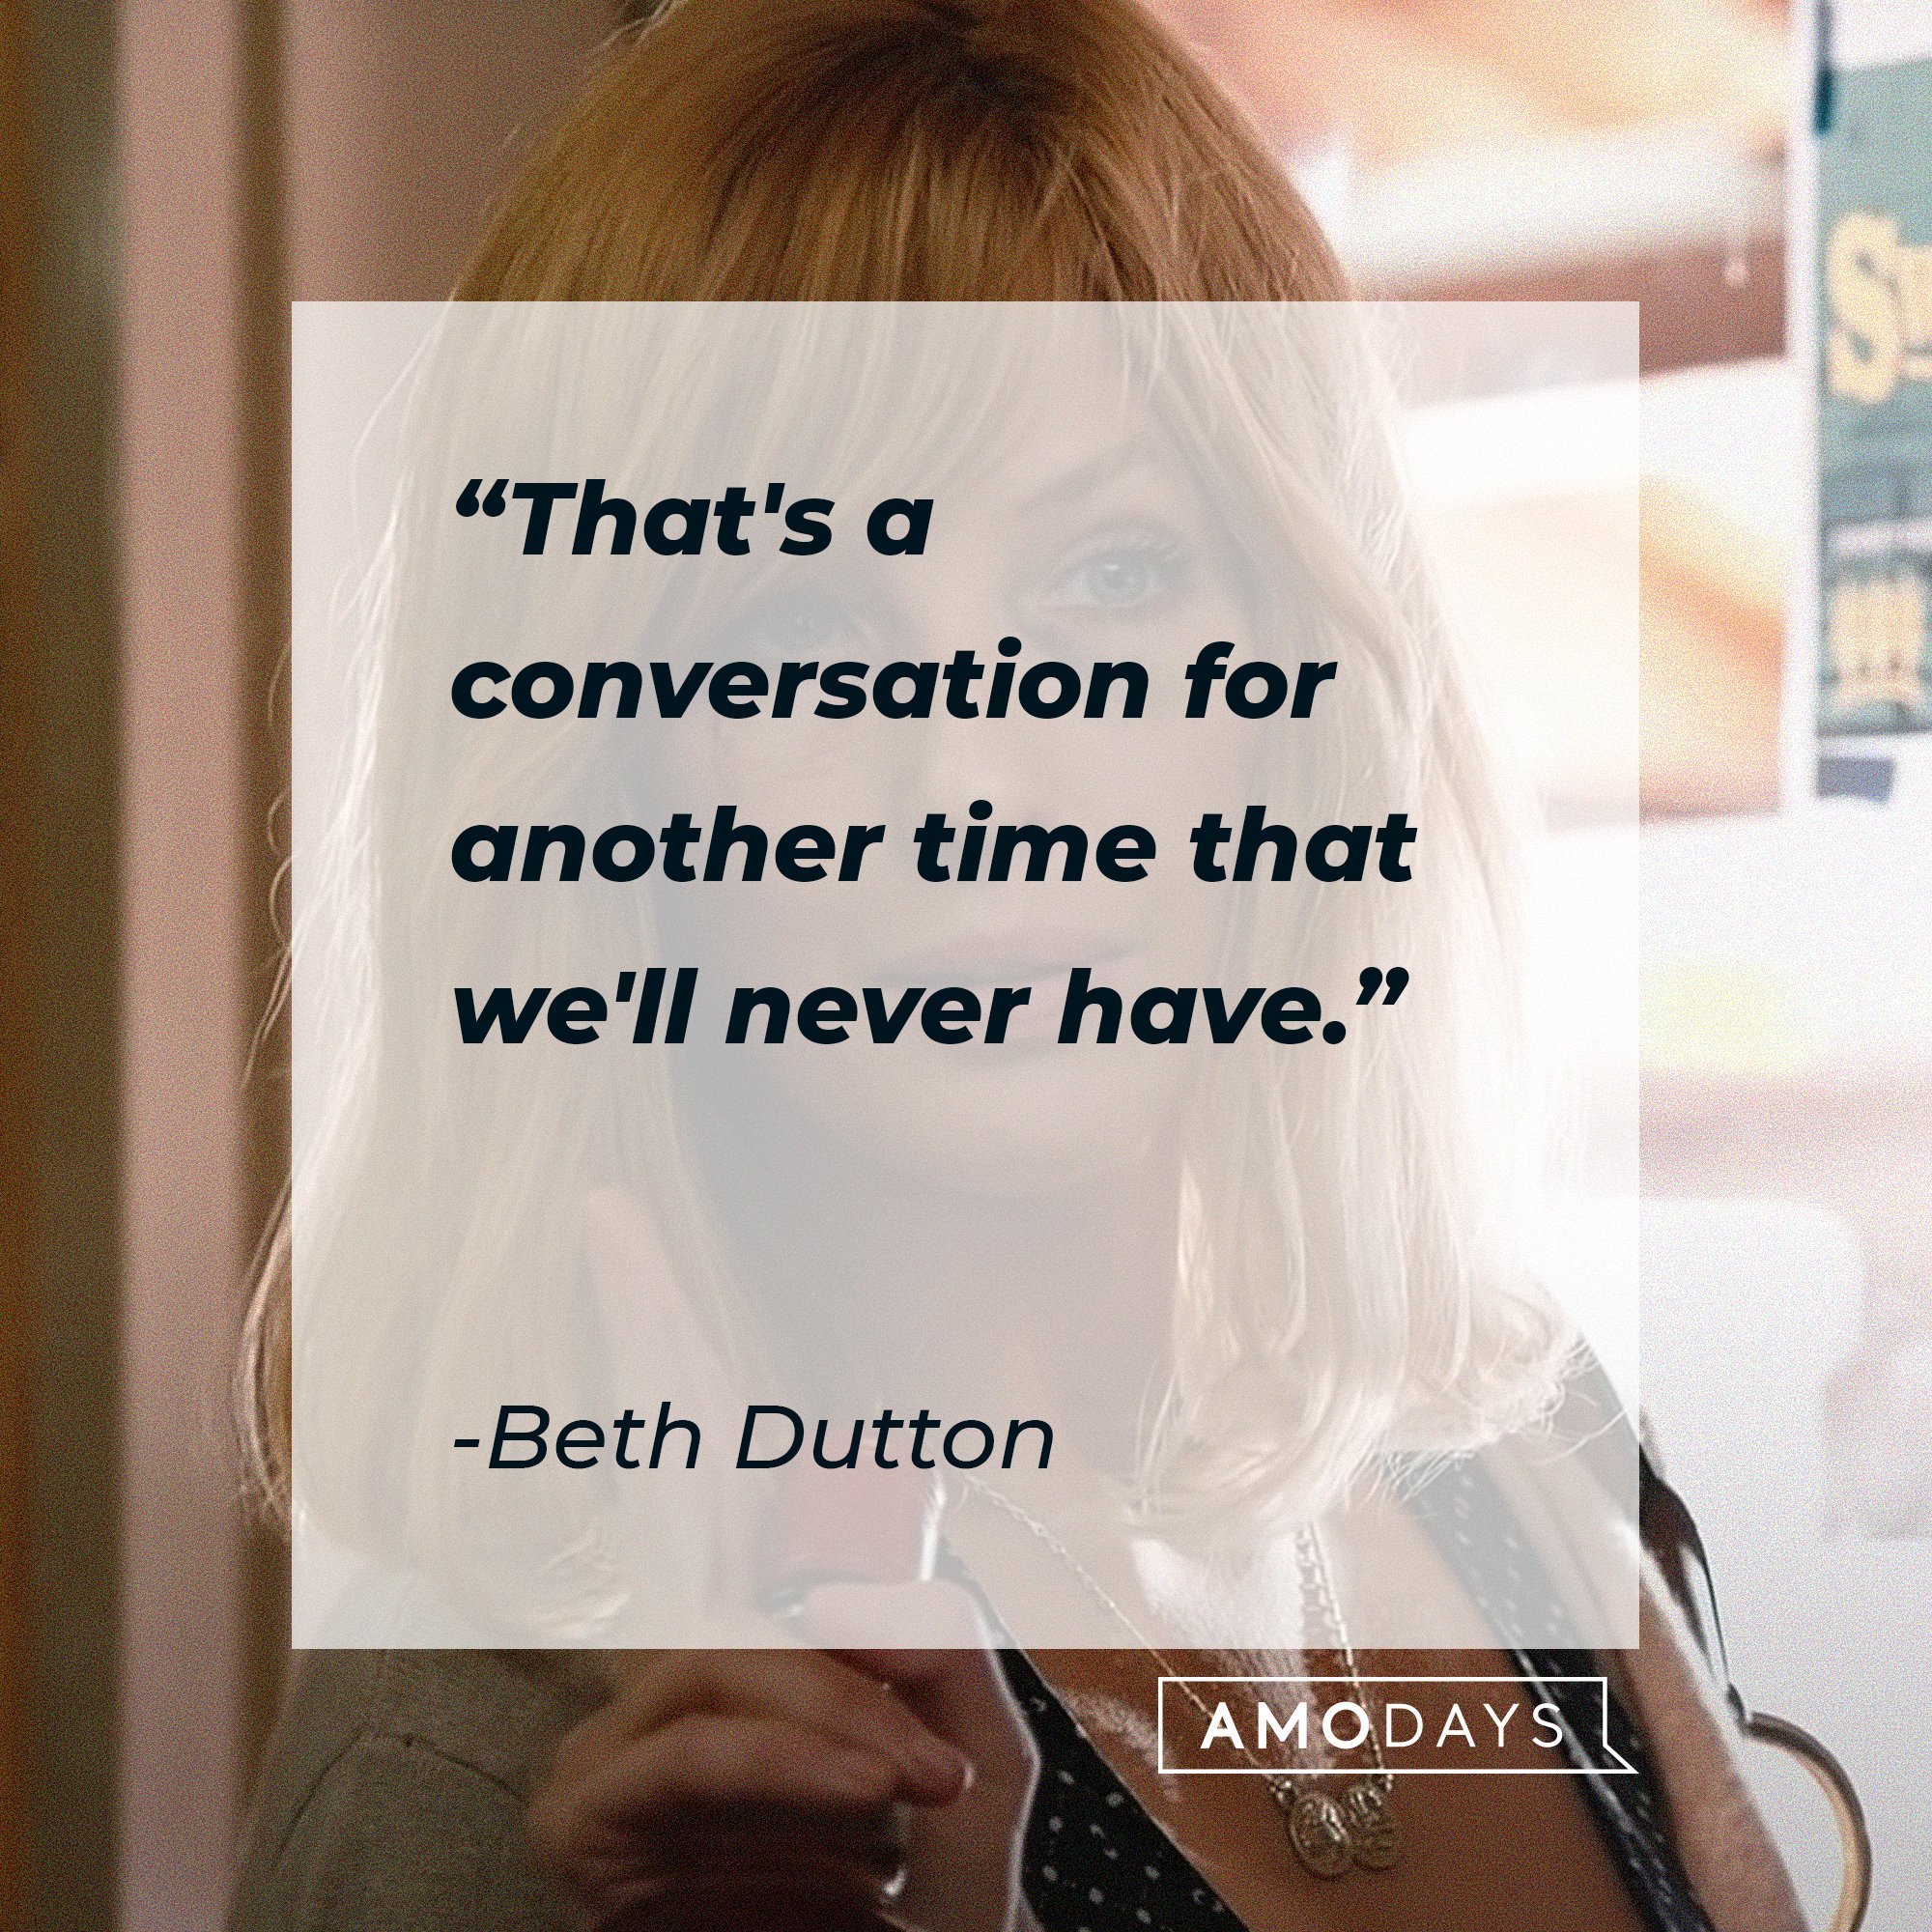  Beth Dutton's quote: " "That's a conversation for another time that we'll never have."  | Source: AmoDays